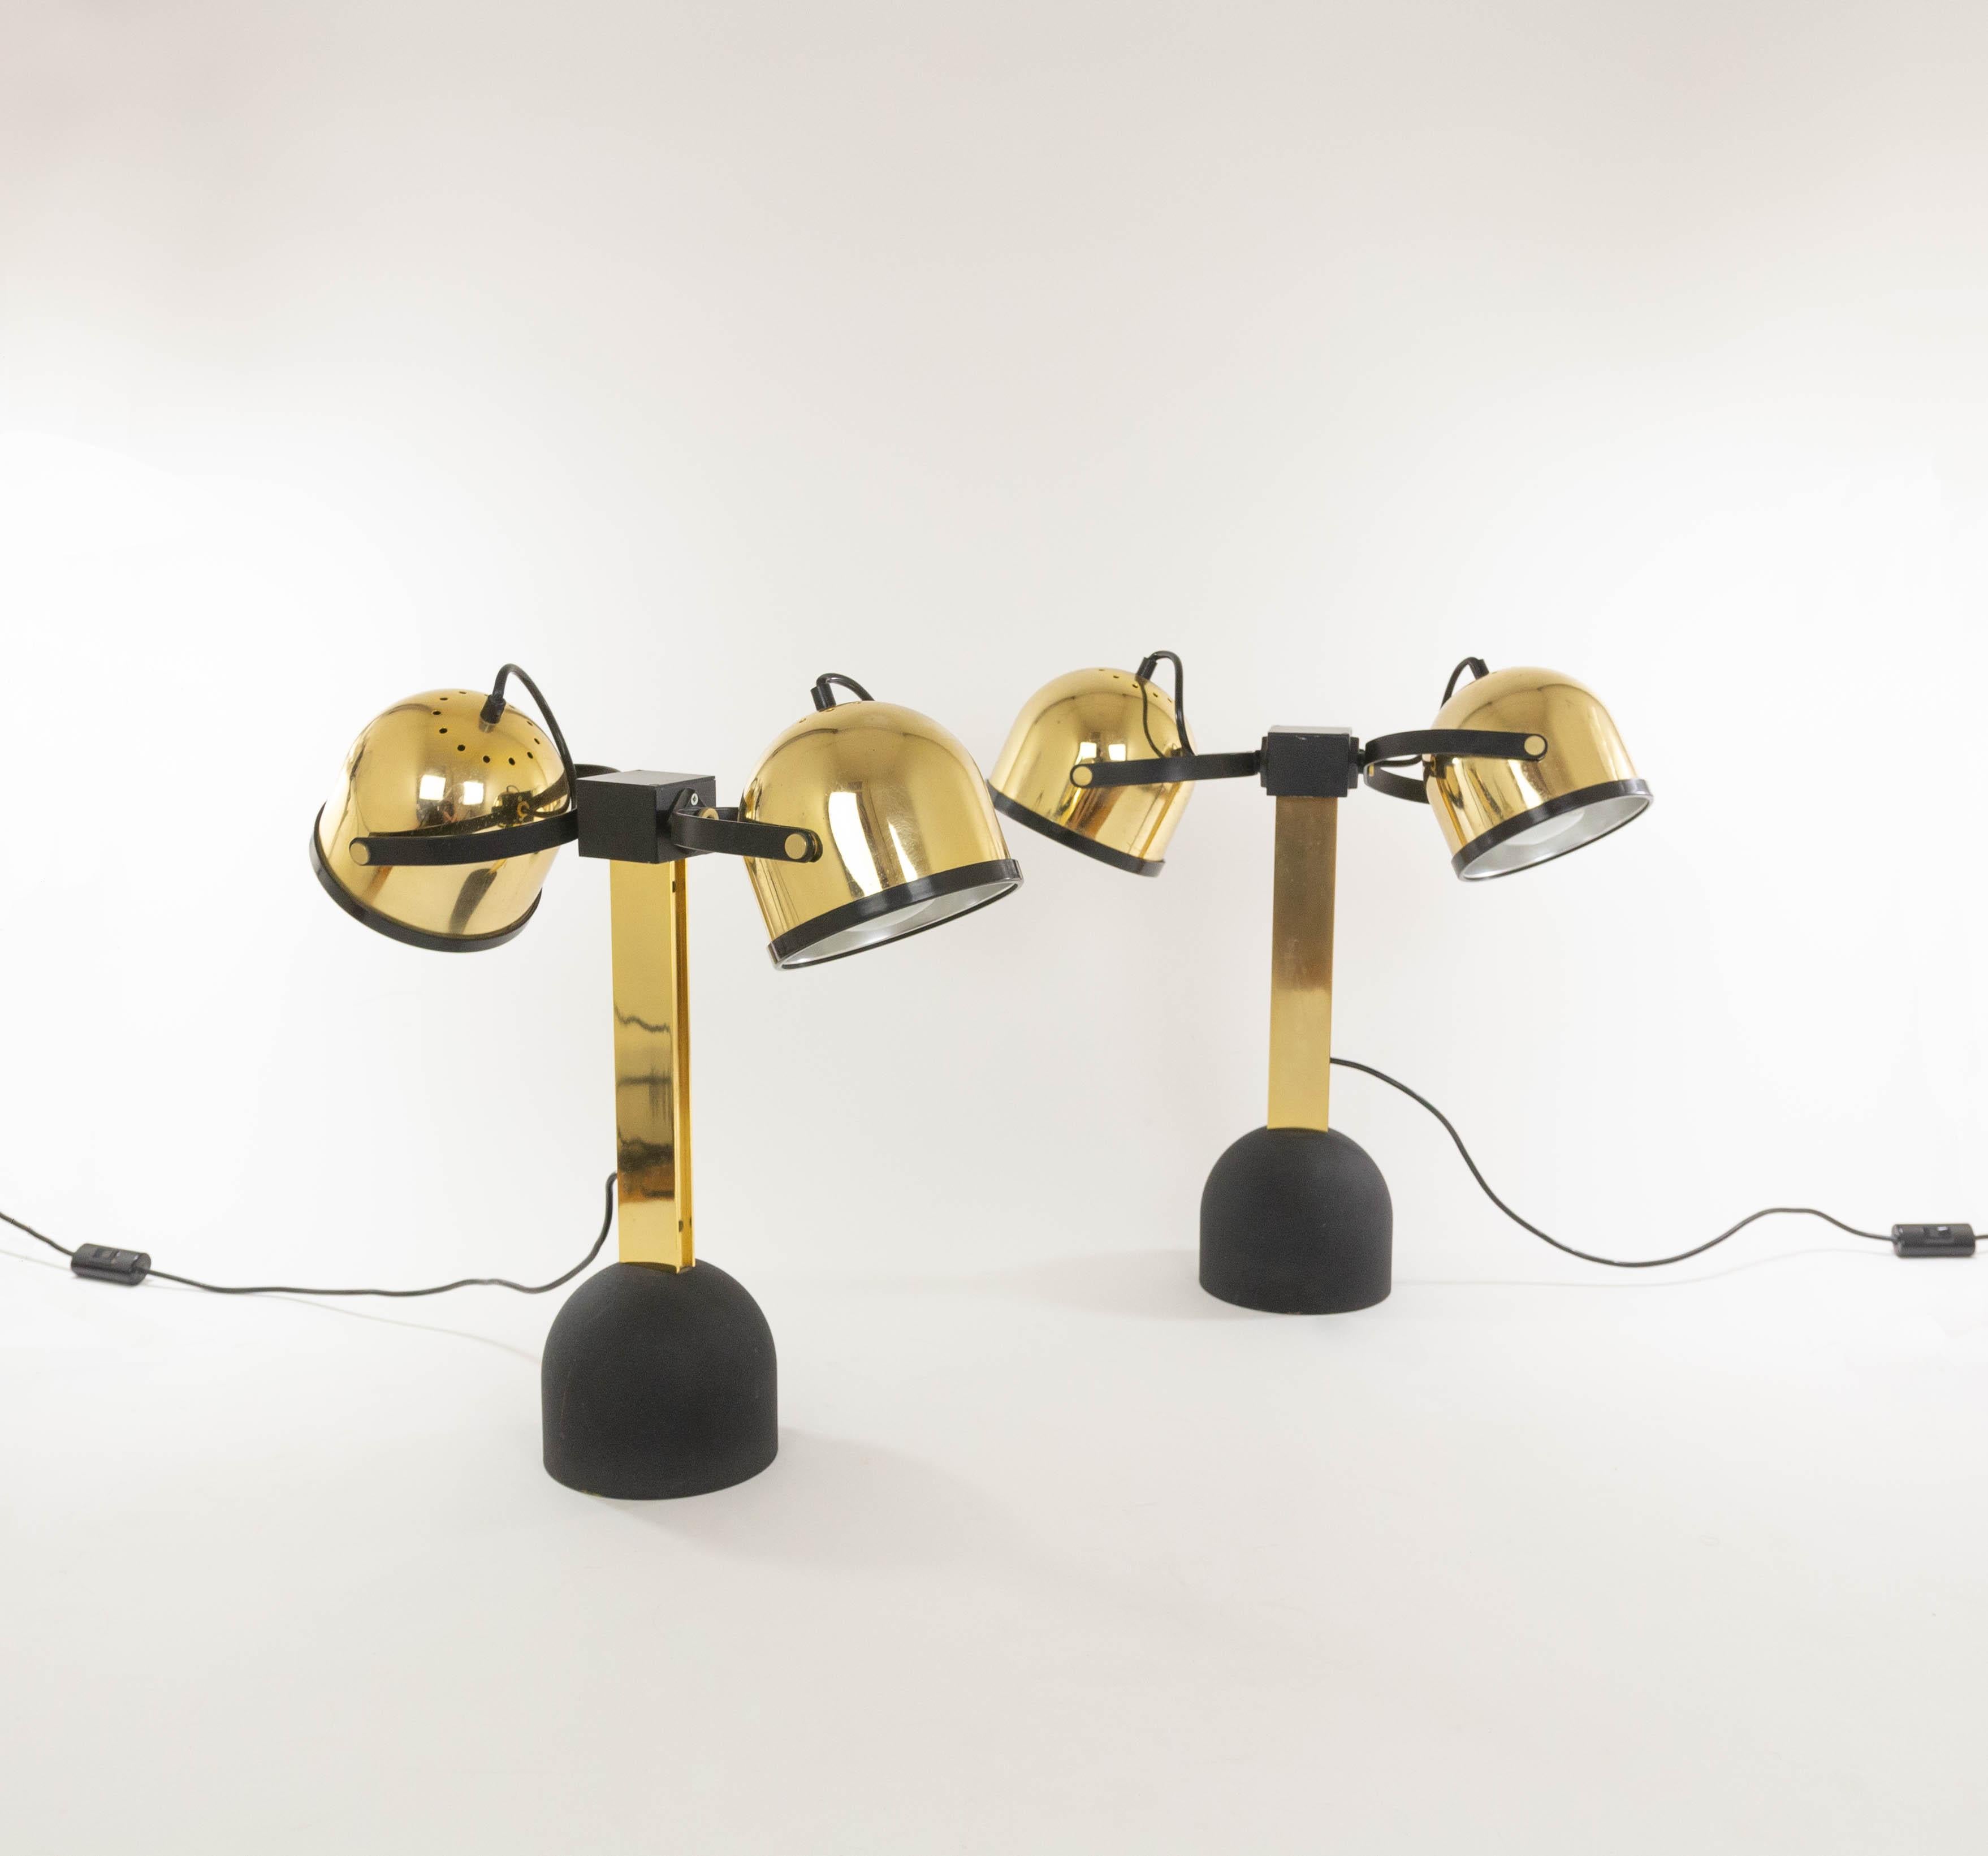 Pair of brass Trepiù table lamps designed by Gae Aulenti and Livio Castiglioni for Stilnovo in the 1970s. These table lamps are part of the Sistema Trepiù range.

The model consists of two spots which can be rotated in all directions and a cast iron